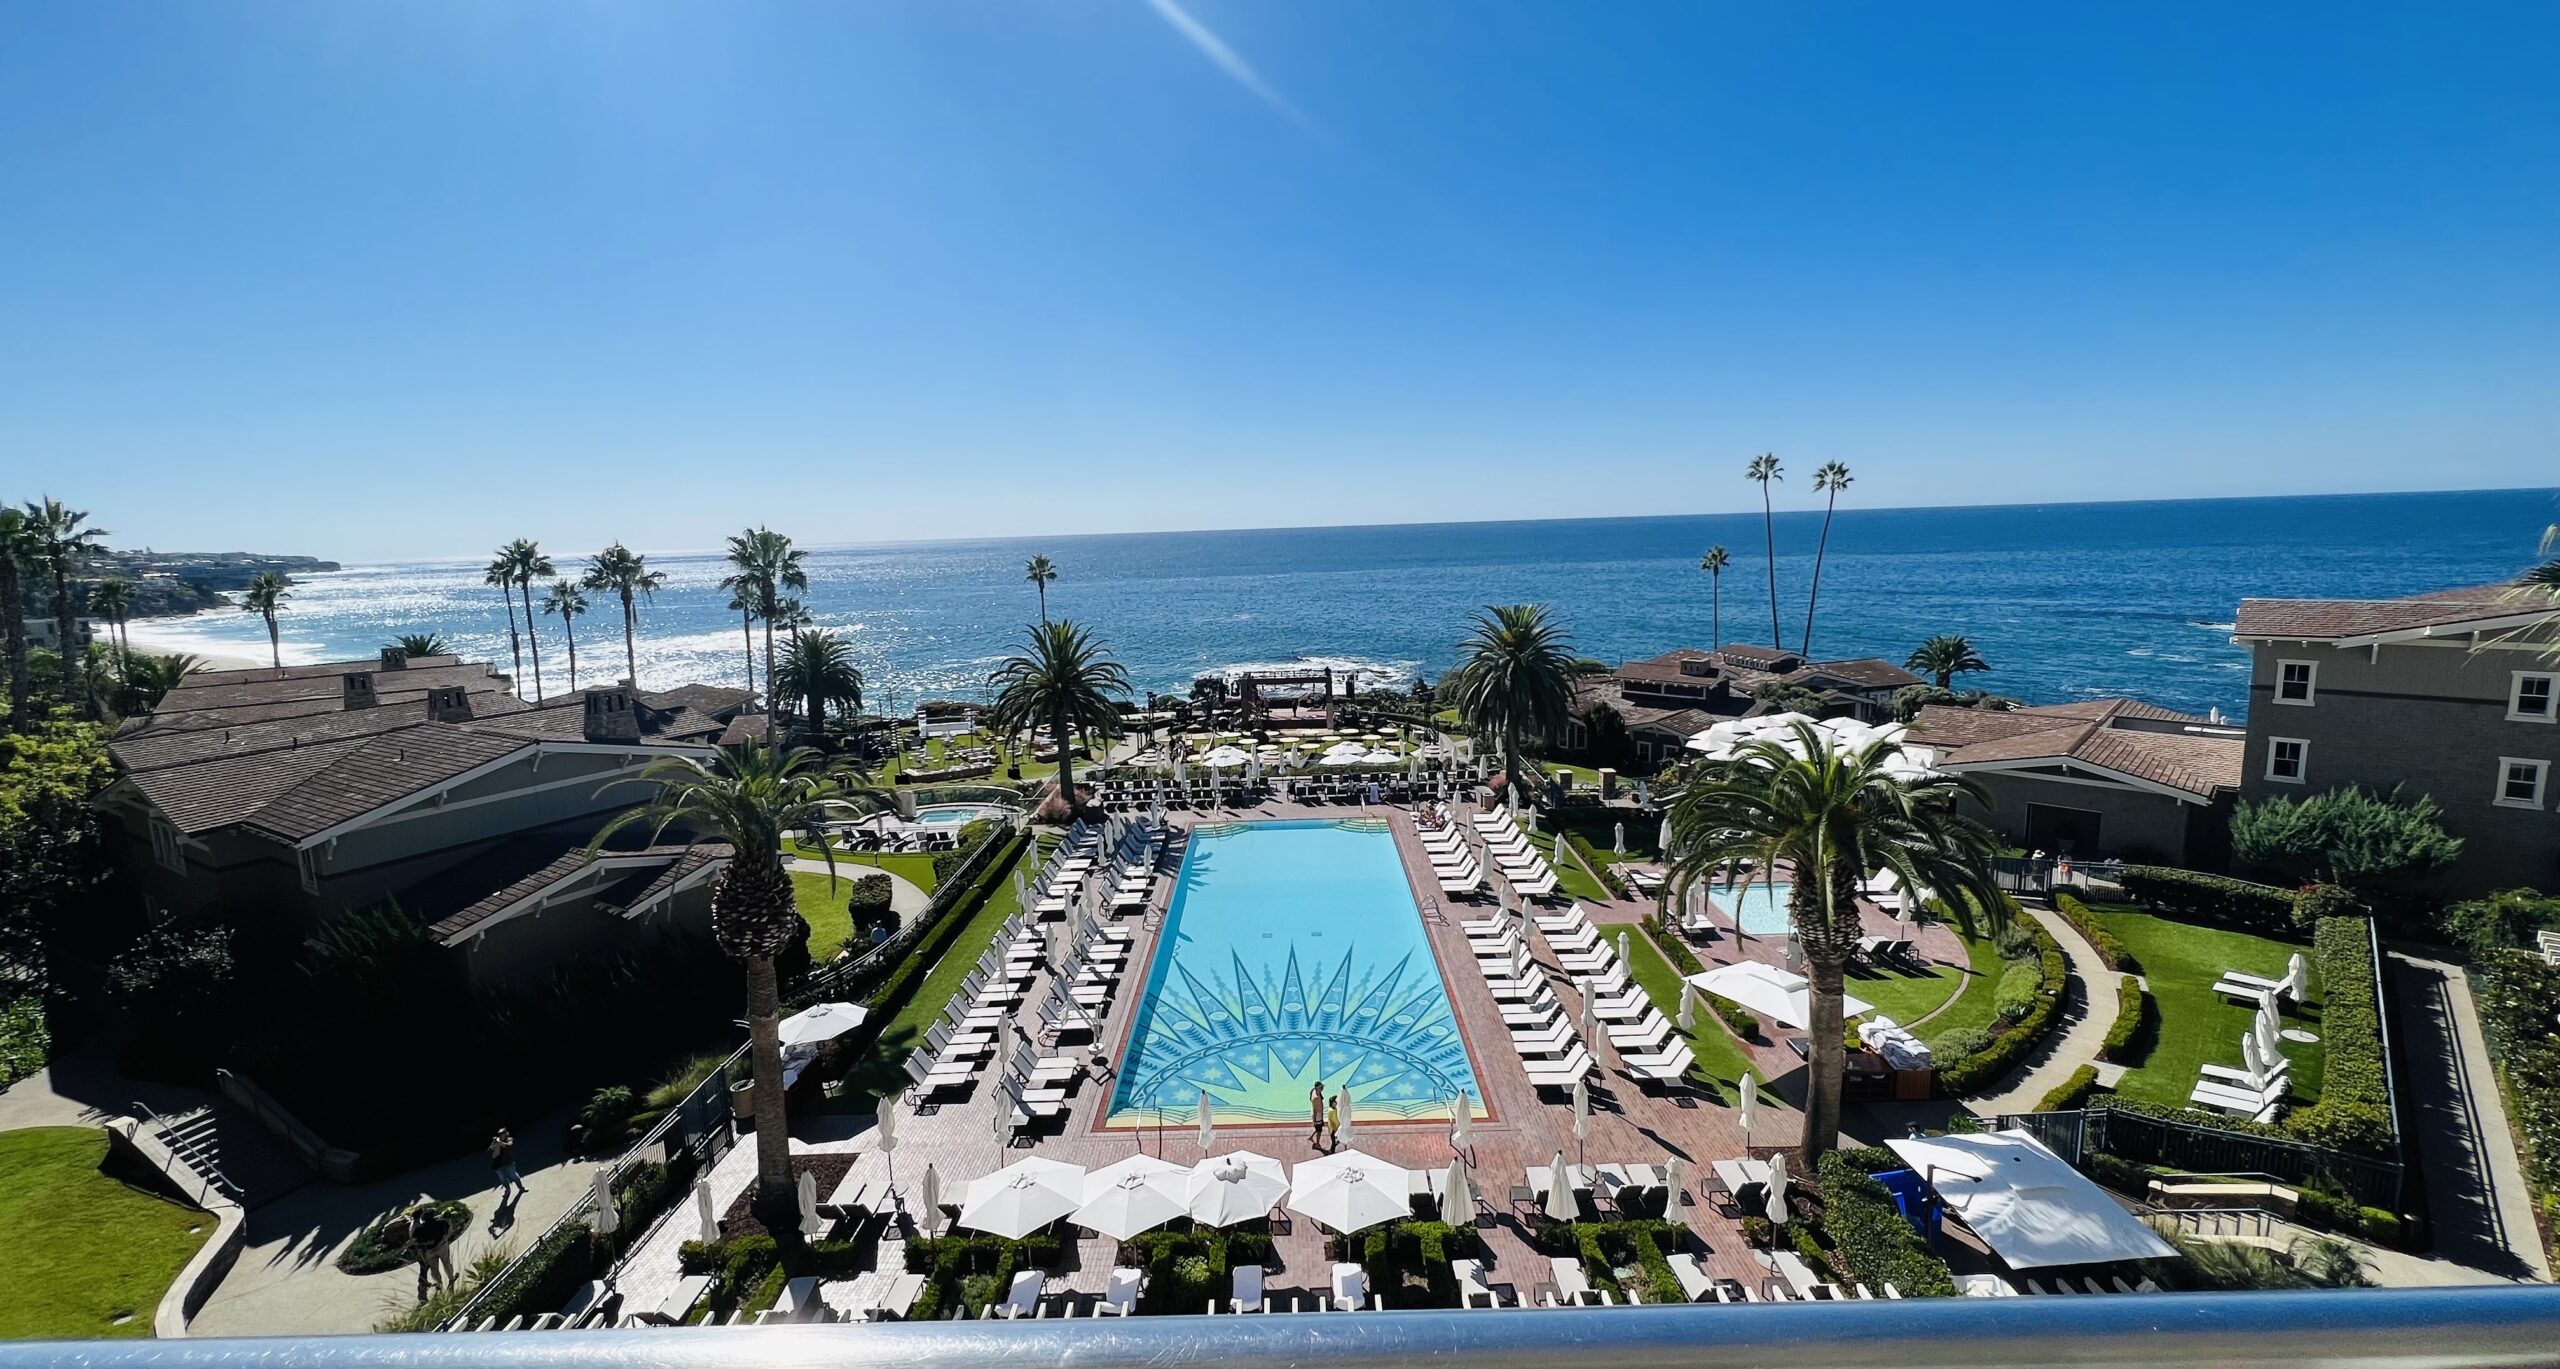 Montage - Forbes Exchange- Angela Delmedico, Elev8 Consulting Group- Laguna Beach- Forbes Business Council